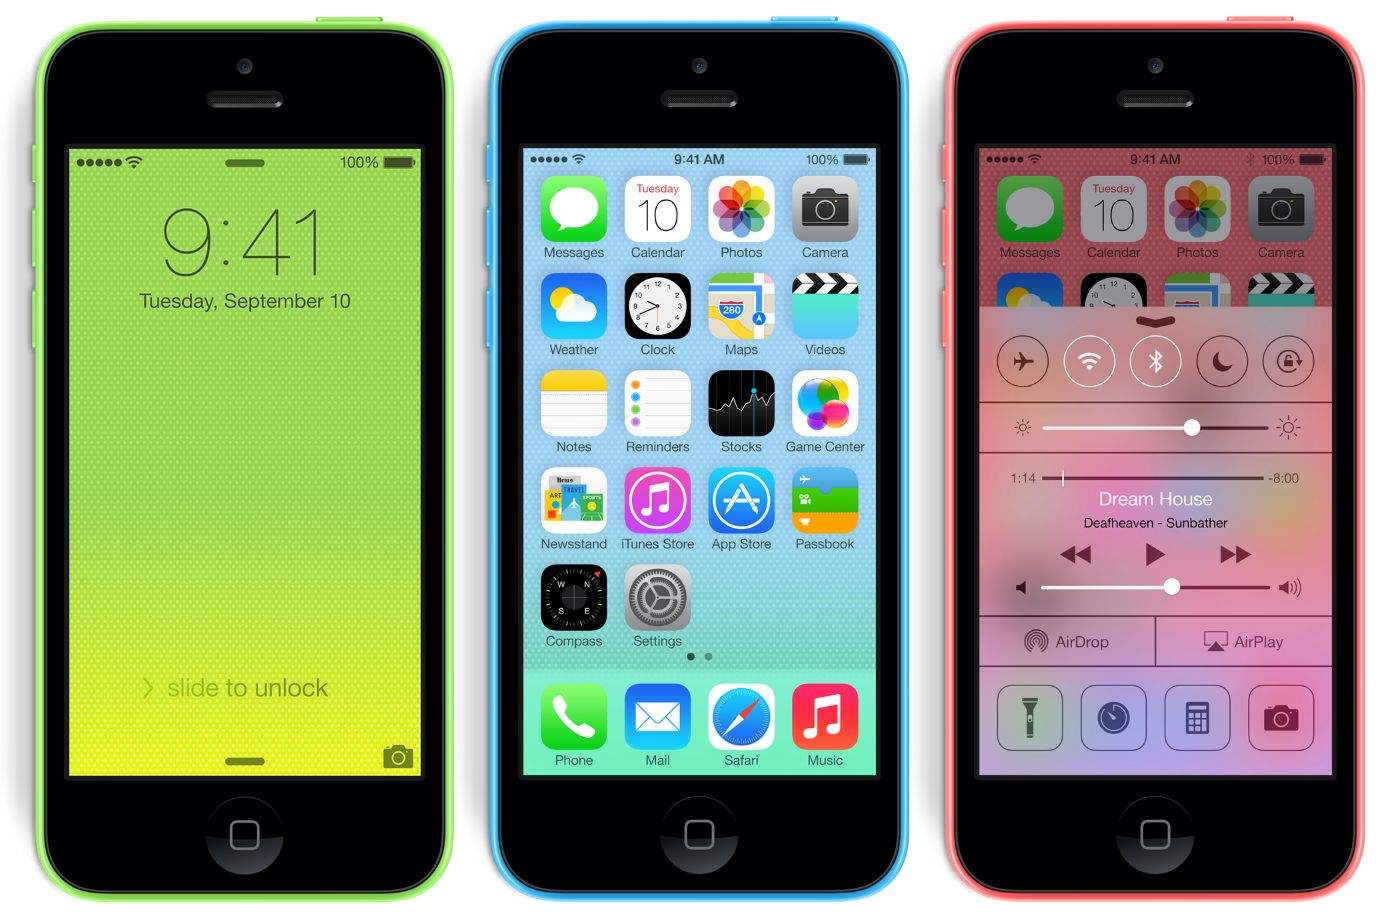 Hacking the iPhone 5c probably cost the FBI more than $1 million.